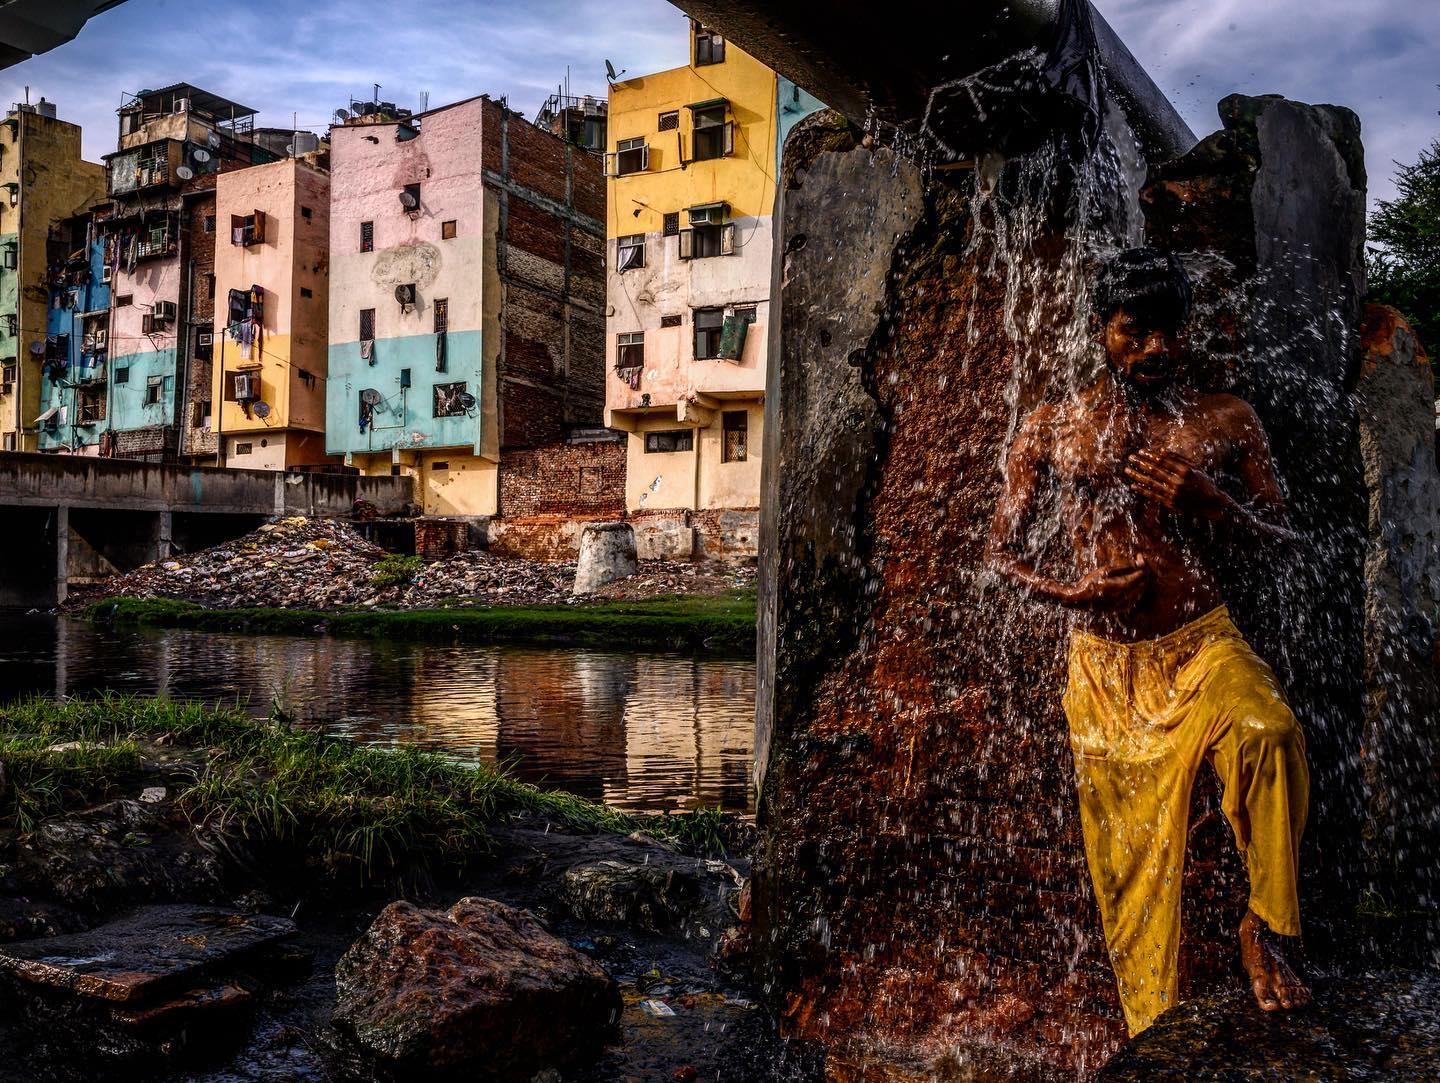 8/6/2019 Delhi, India. A man bathed in water spouting from a broken municipal water line along the Barapullah waterway in New Delhi. Bryan Denton for the New York Times.